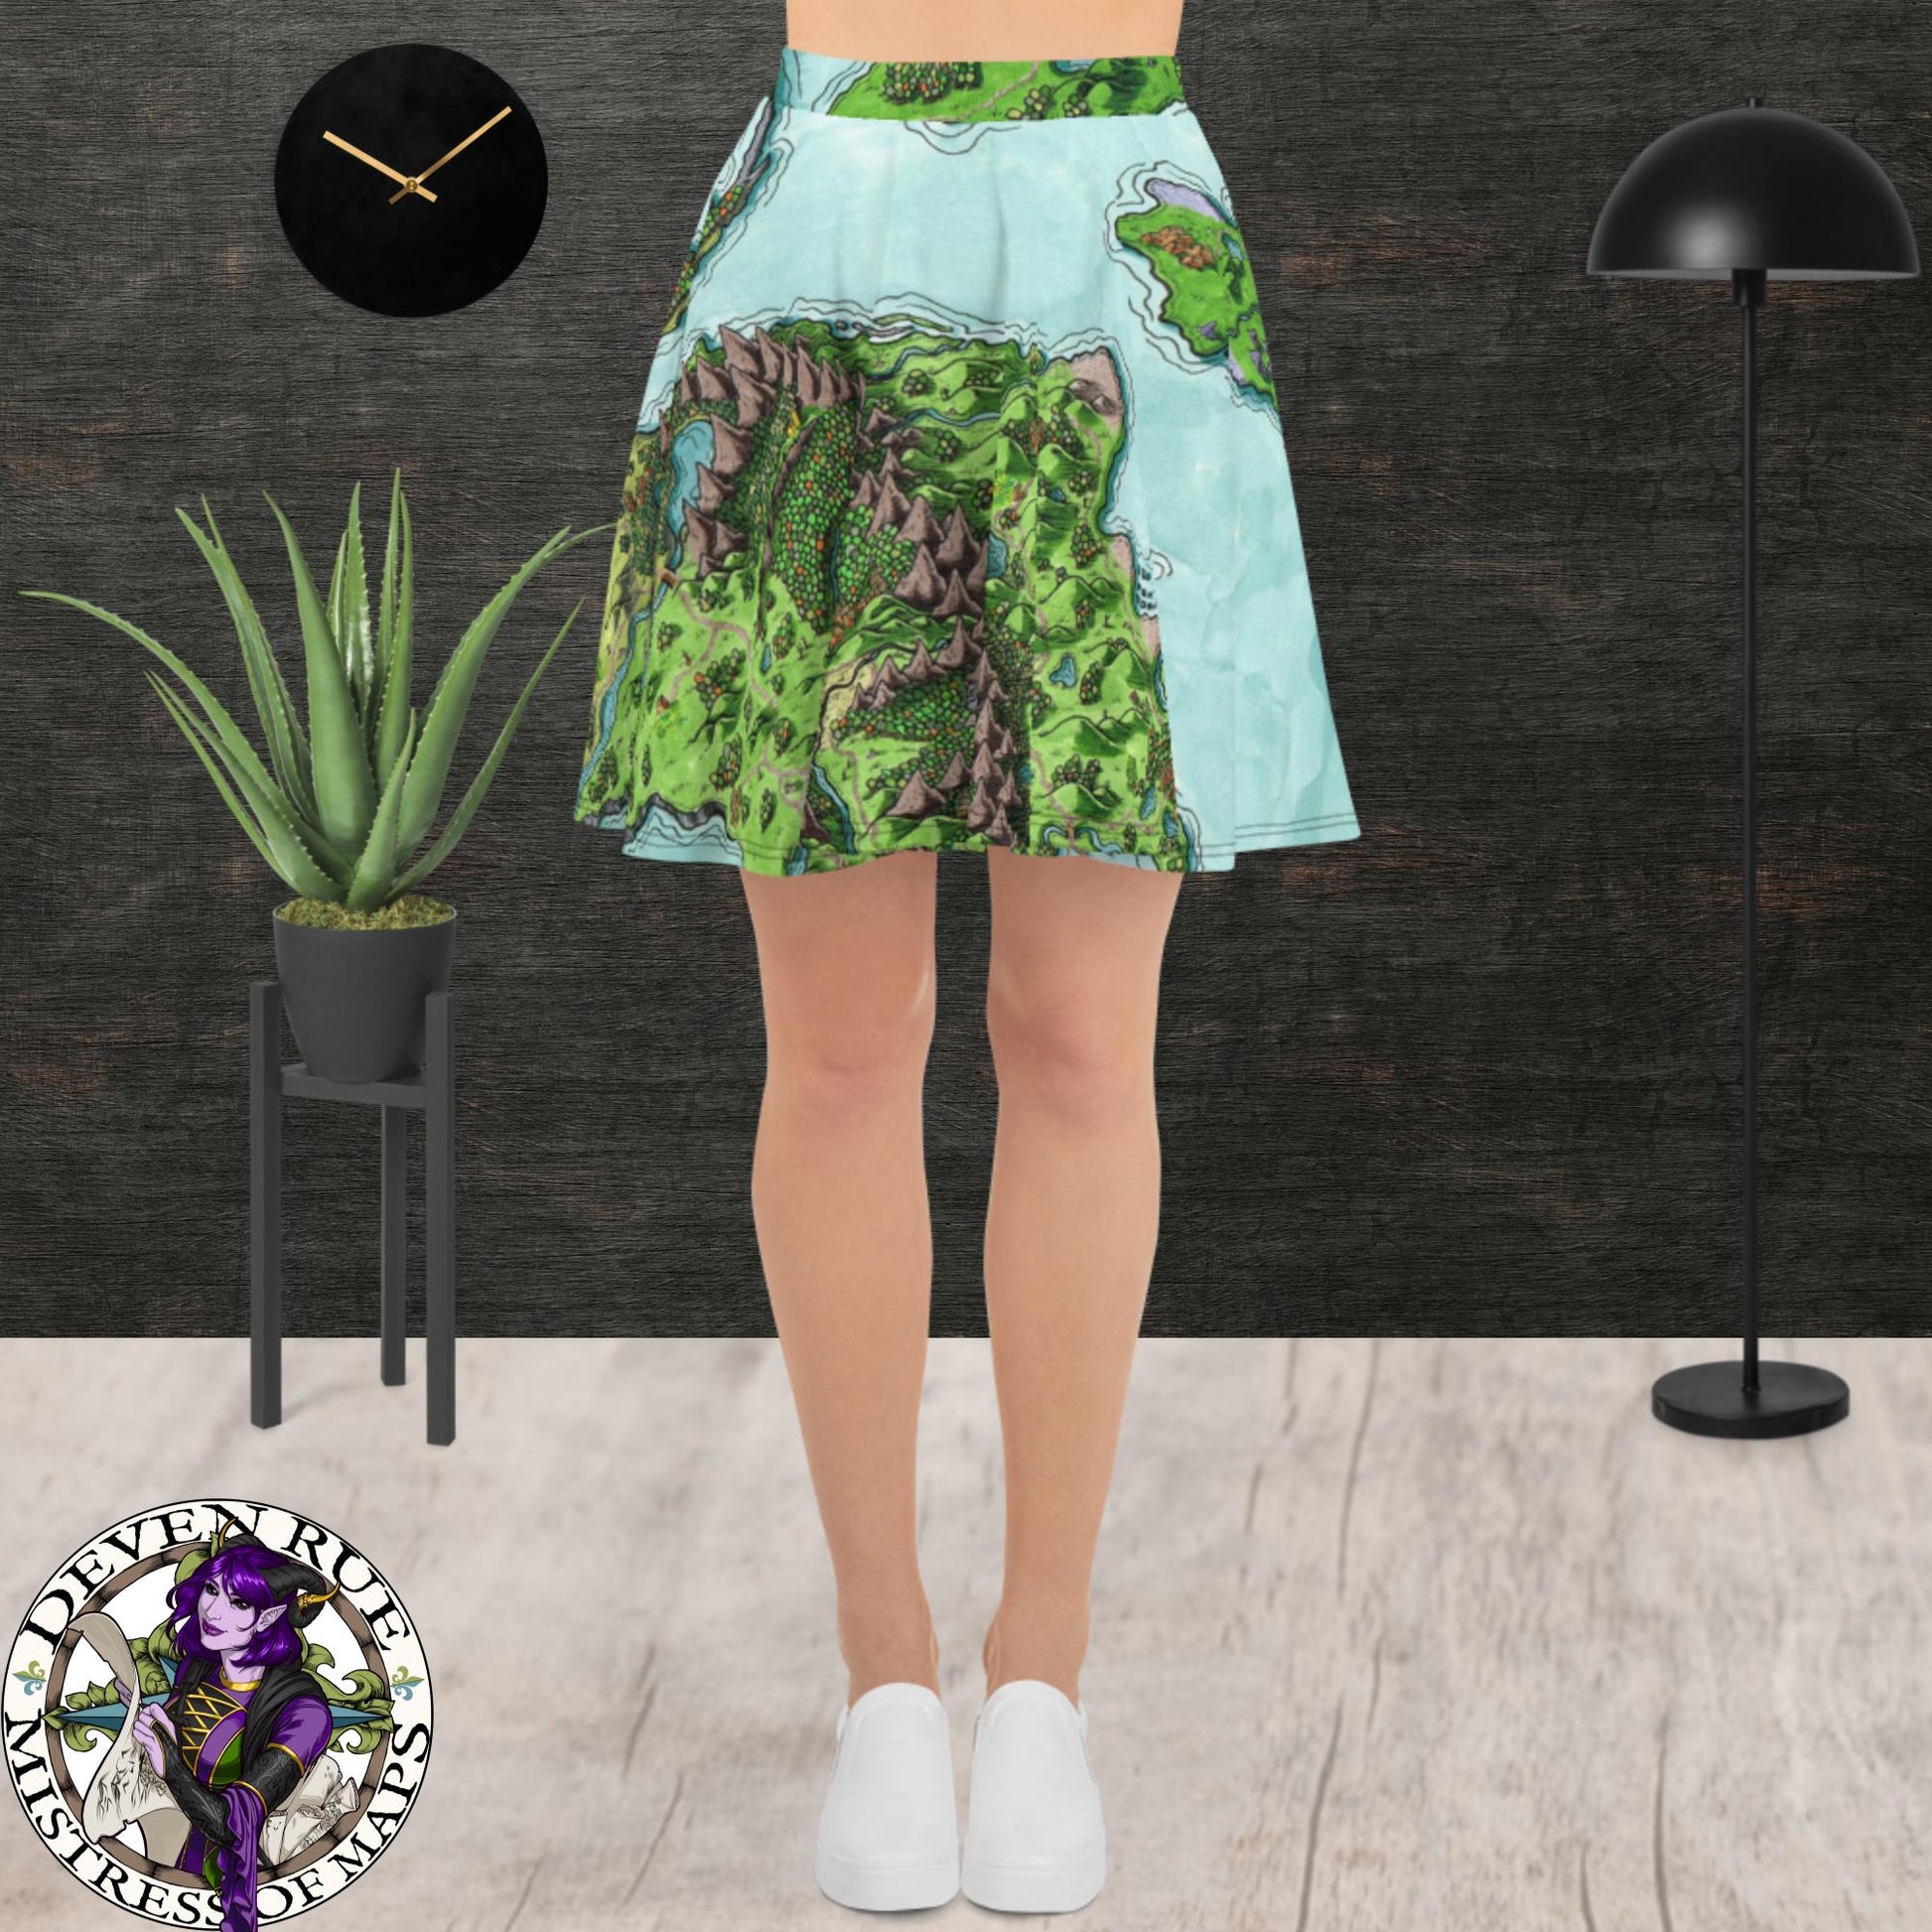 A model wears the Euphoros map by Deven Rue on a skater skirt.